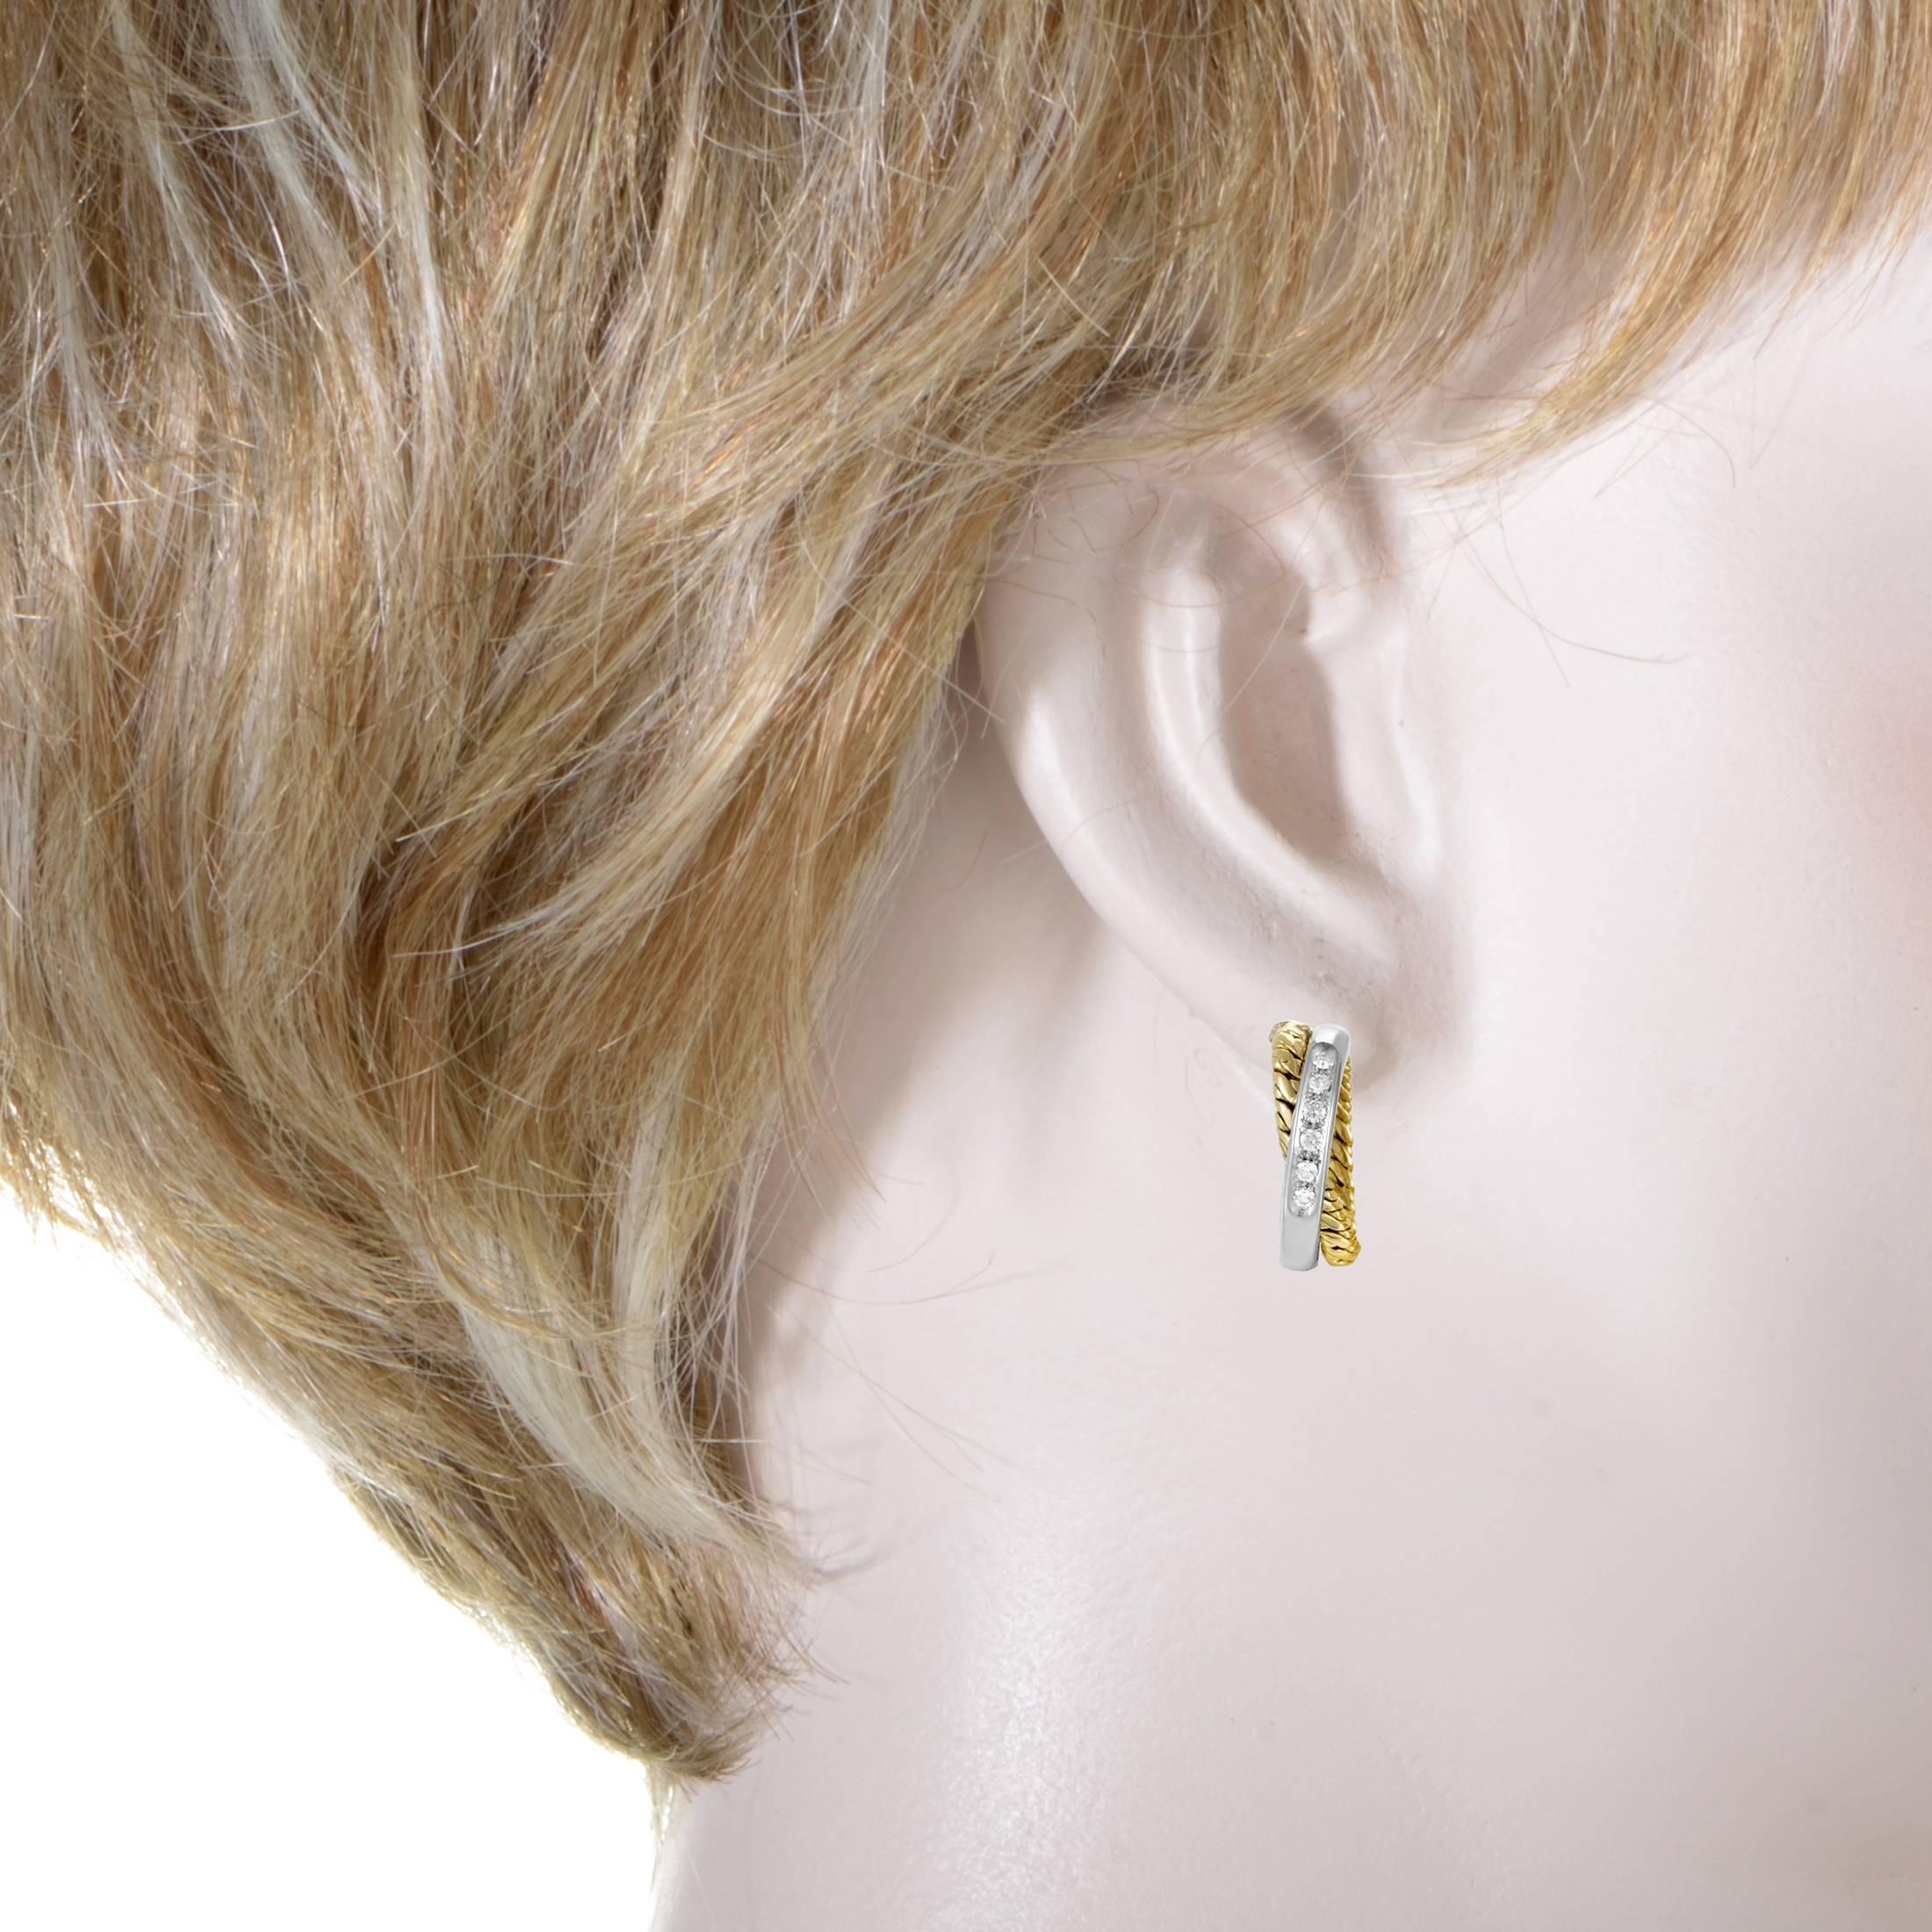 Embellished with resplendent diamonds weighing in total 0.45ct and boasting a spotless gleam, the 18K white gold is combined in this fascinating pair of earrings from Pomellato with fantastically textured 18K yellow gold for an intriguing